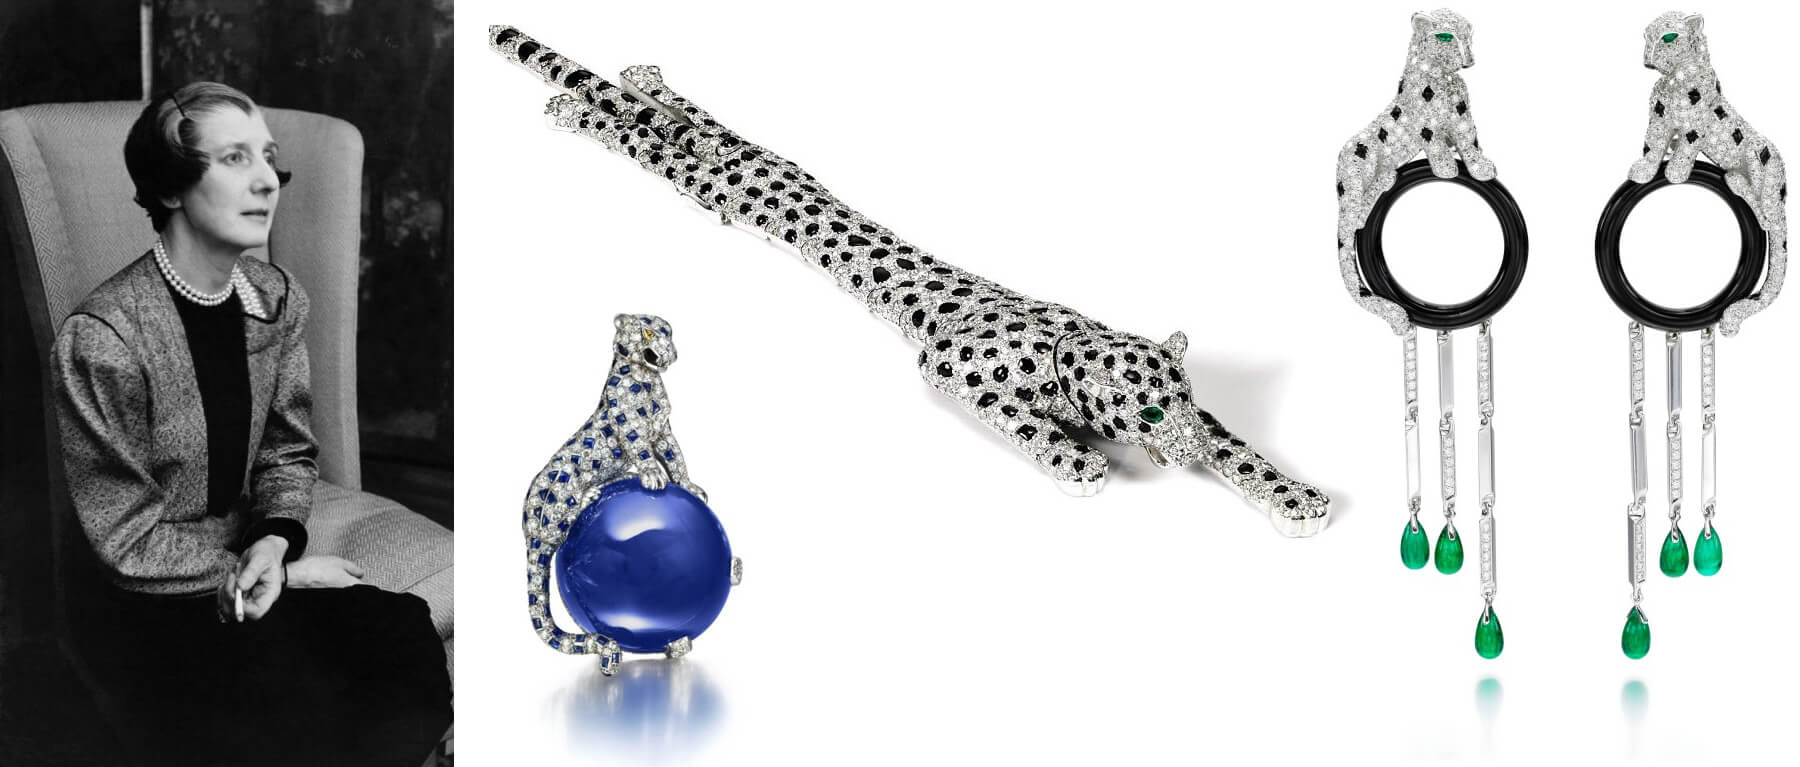 Jeanne Toussaint and some of her iconic panther designs for Cartier